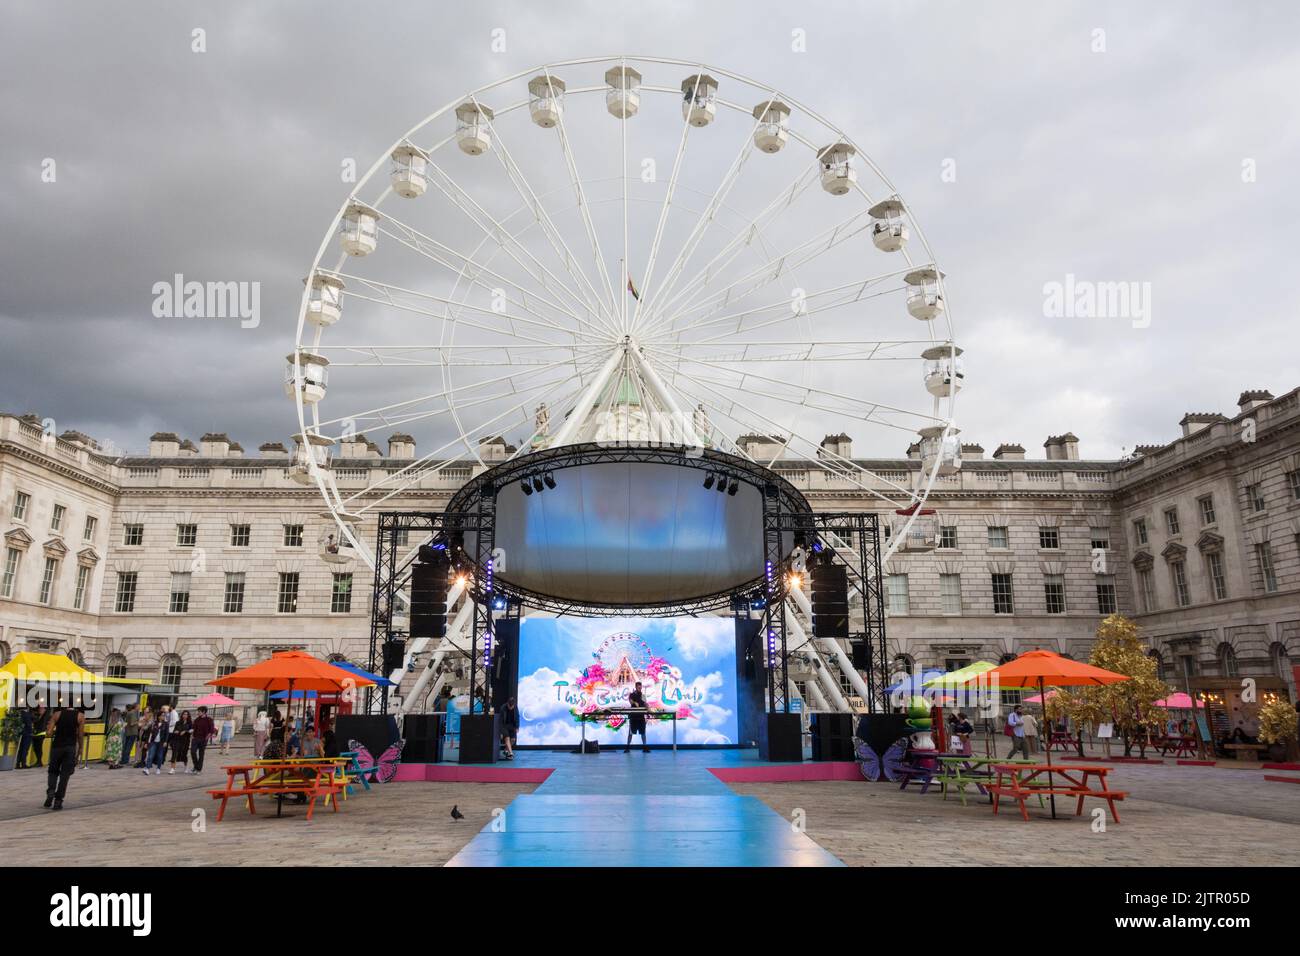 The stage and Ferris Wheel at the This Bright Land performance in the neoclassical Somerset House Courtyard, London, England, UK Stock Photo